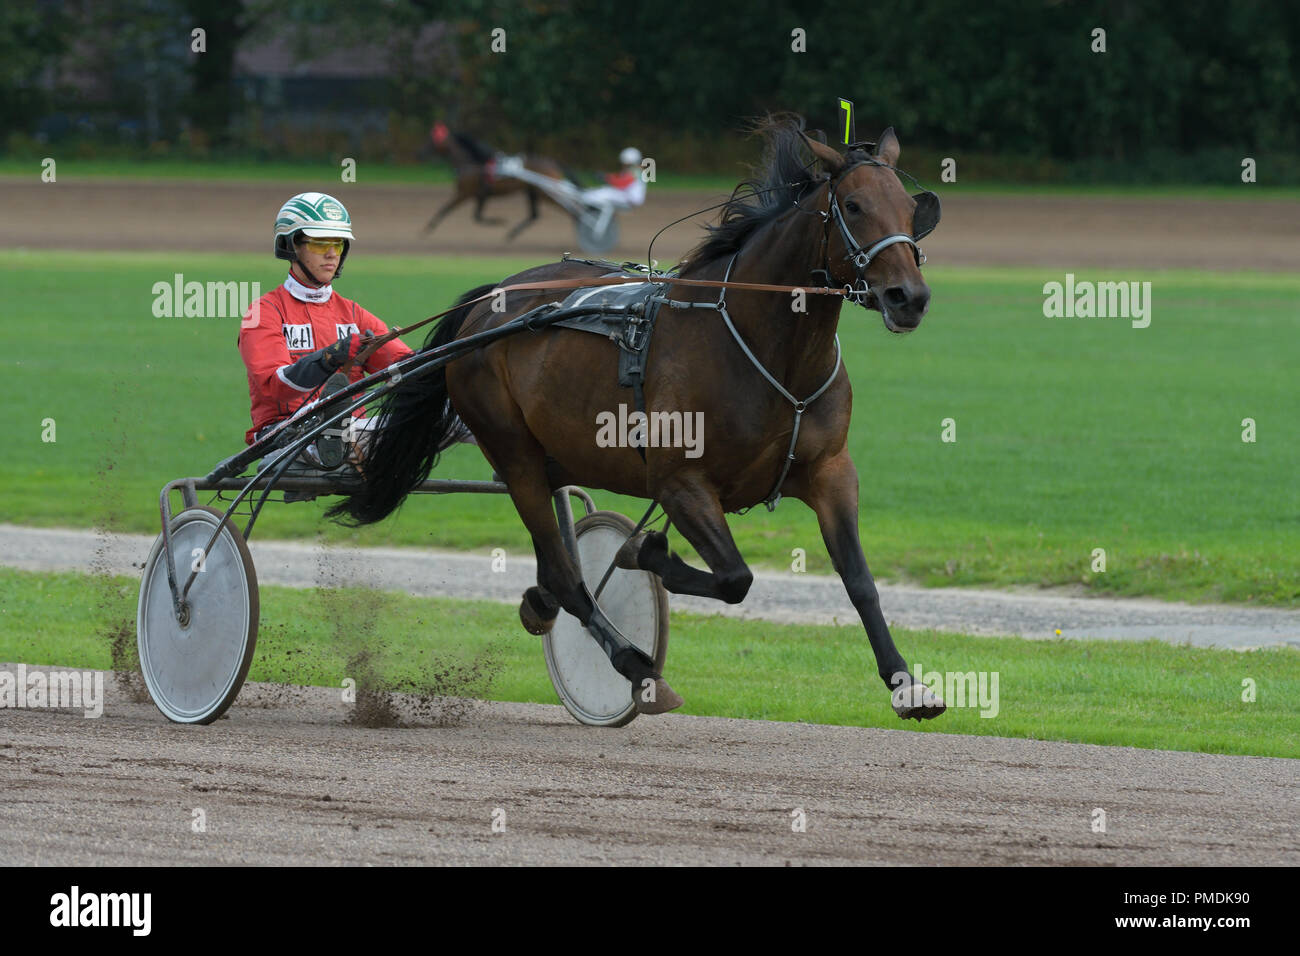 Harness racing for trotting horses, a horse race in which the horses race  at a specific gait. They pull a two-wheeled cart called a sulky Stock Photo  - Alamy